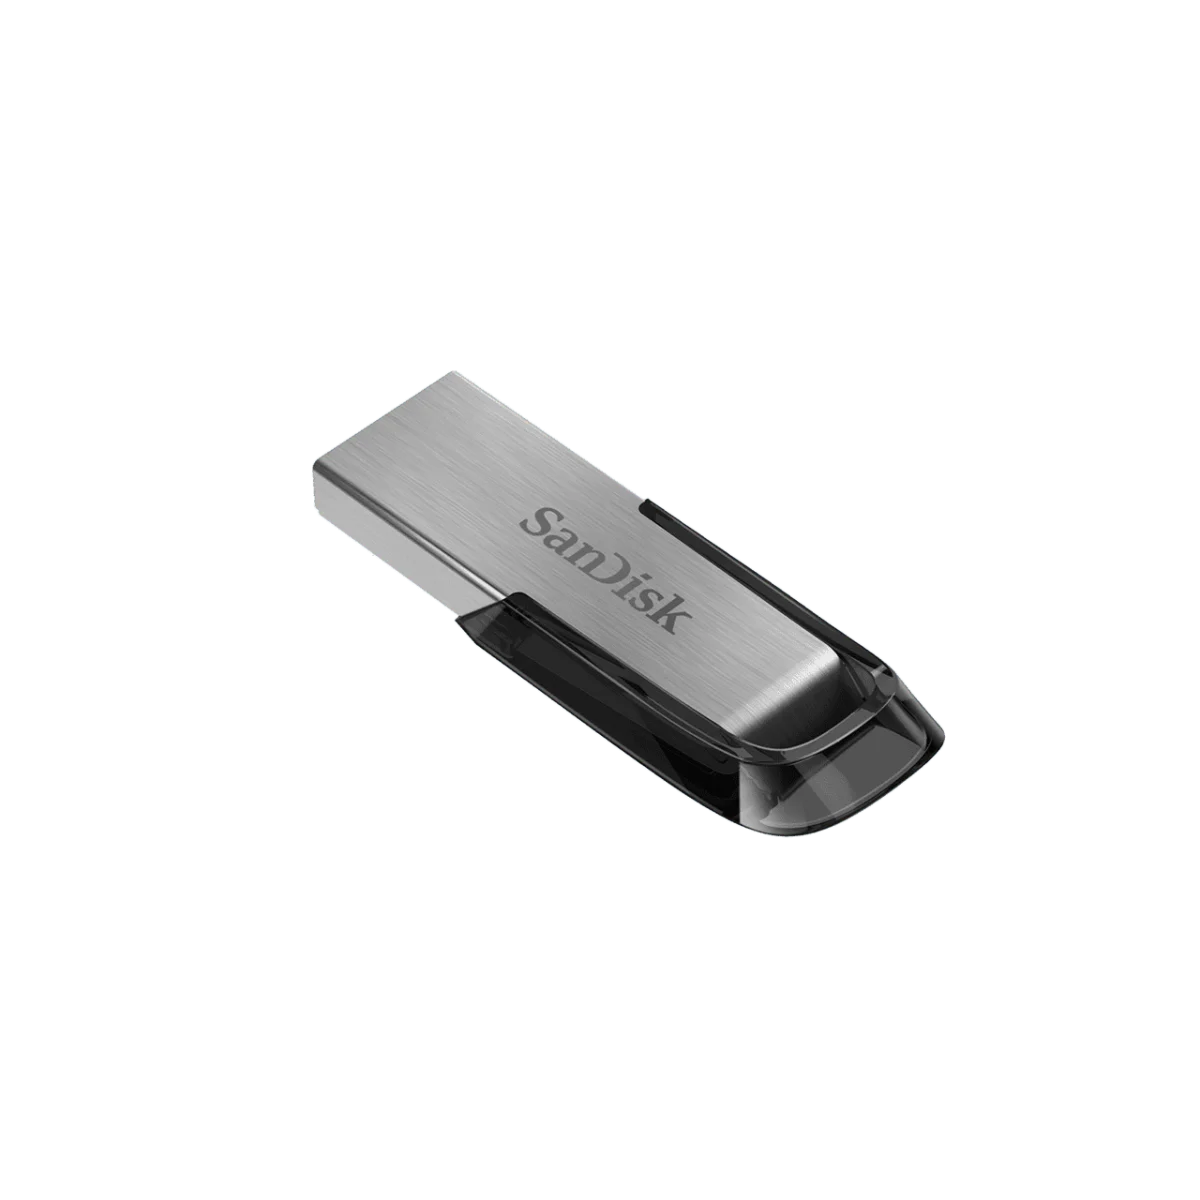 Ultra Flair Usb 3 0 Right.png.thumb .1280.1280 Sandisk &Lt;Div Class=&Quot;Inheritpara Mb-4&Quot;&Gt; The Sandisk Ultra Flair™ Usb 3.0 Flash Drive Moves Your Files Fast. Spend Less Time Waiting To Transfer Files And Enjoy High-Speed Usb 3.0 Performance Of Up To 150Mb/S&Lt;A Class=&Quot;Disclosure&Quot; Tabindex=&Quot;0&Quot; Href=&Quot;Https://Shop.westerndigital.com/Products/Usb-Flash-Drives/Sandisk-Ultra-Flair-Usb-3-0#Disclosures&Quot; Target=&Quot;_Self&Quot; Rel=&Quot;Noopener Noreferrer&Quot; Aria-Labelledby=&Quot;Disclosures&Quot;&Gt;&Lt;Sup&Gt;**&Lt;/Sup&Gt;&Lt;/A&Gt;. Its Durable And Sleek Metal Casing Is Tough Enough To Handle Knocks With Style. And, With Password Protection, You Can Rest Assured That Your Private Files Stay Private&Lt;A Class=&Quot;Disclosure&Quot; Tabindex=&Quot;0&Quot; Href=&Quot;Https://Shop.westerndigital.com/Products/Usb-Flash-Drives/Sandisk-Ultra-Flair-Usb-3-0#Disclosures&Quot; Target=&Quot;_Self&Quot; Rel=&Quot;Noopener Noreferrer&Quot; Aria-Labelledby=&Quot;Disclosures&Quot;&Gt;&Lt;Sup&Gt;1&Lt;/Sup&Gt;&Lt;/A&Gt;. Store Your Files In Style With The Sandisk Ultra Flair Usb 3.0 Flash Drive. &Lt;Strong&Gt;Warranty&Lt;/Strong&Gt; The Sandisk Ultra Flair Usb 3.0 Flash Drive Is Backed By A Five-Year Manufacturer Warranty&Lt;A Class=&Quot;Disclosure&Quot; Tabindex=&Quot;0&Quot; Href=&Quot;Https://Shop.westerndigital.com/Products/Usb-Flash-Drives/Sandisk-Ultra-Flair-Usb-3-0#Disclosures&Quot; Target=&Quot;_Self&Quot; Rel=&Quot;Noopener Noreferrer&Quot; Aria-Labelledby=&Quot;Disclosures&Quot;&Gt;&Lt;Sup&Gt;2&Lt;/Sup&Gt;&Lt;/A&Gt; &Lt;/Div&Gt; Flash Drive Sandisk Ultra Flair Usb 3.0 Flash Drive (64Gb)